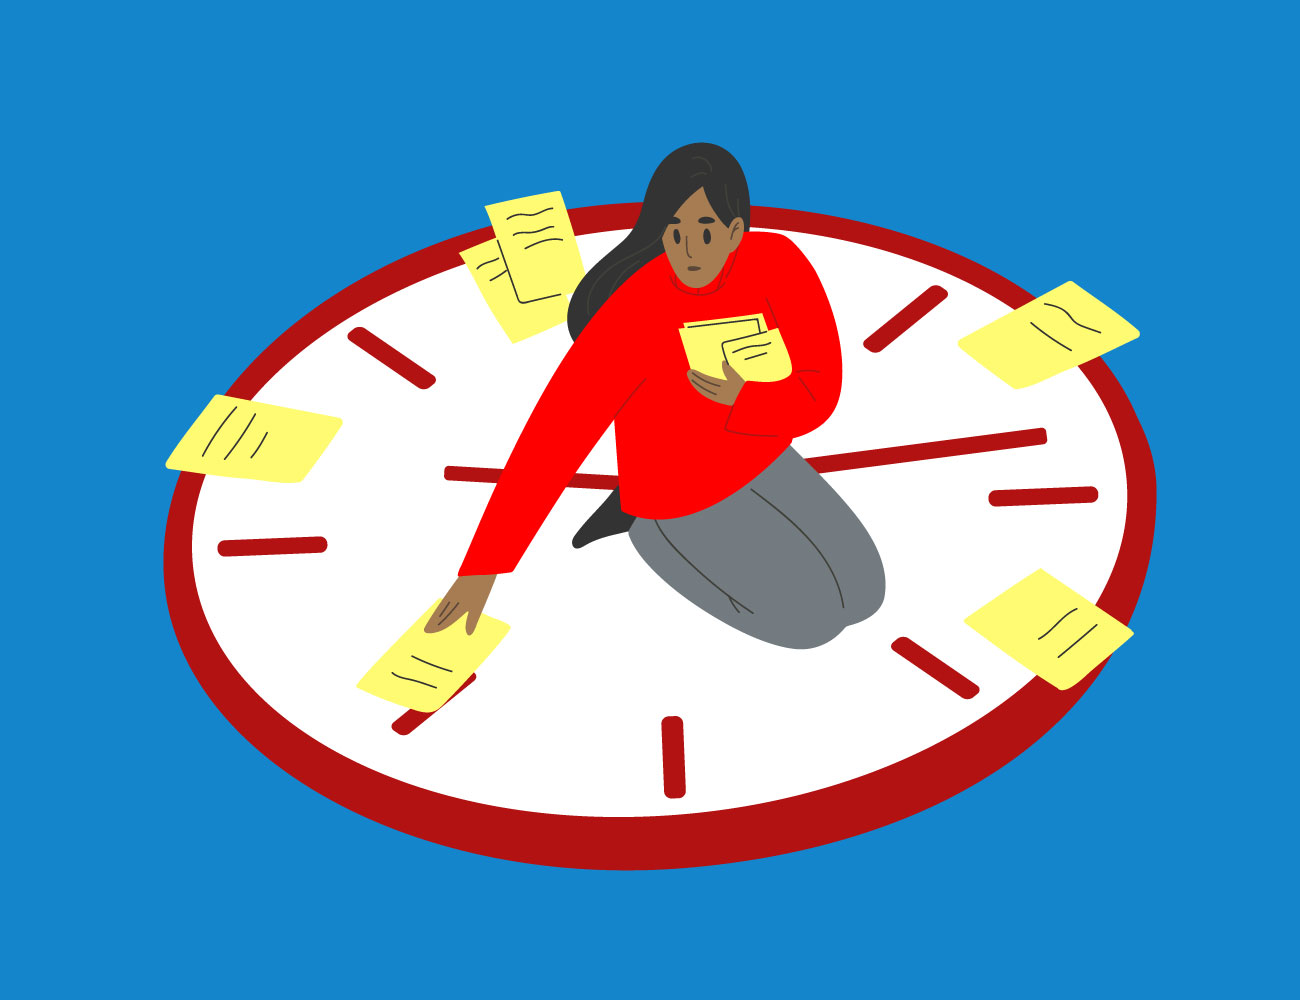 Illustration of a person kneeling on an oversized clock and laying out documents on different segments of the clock face.